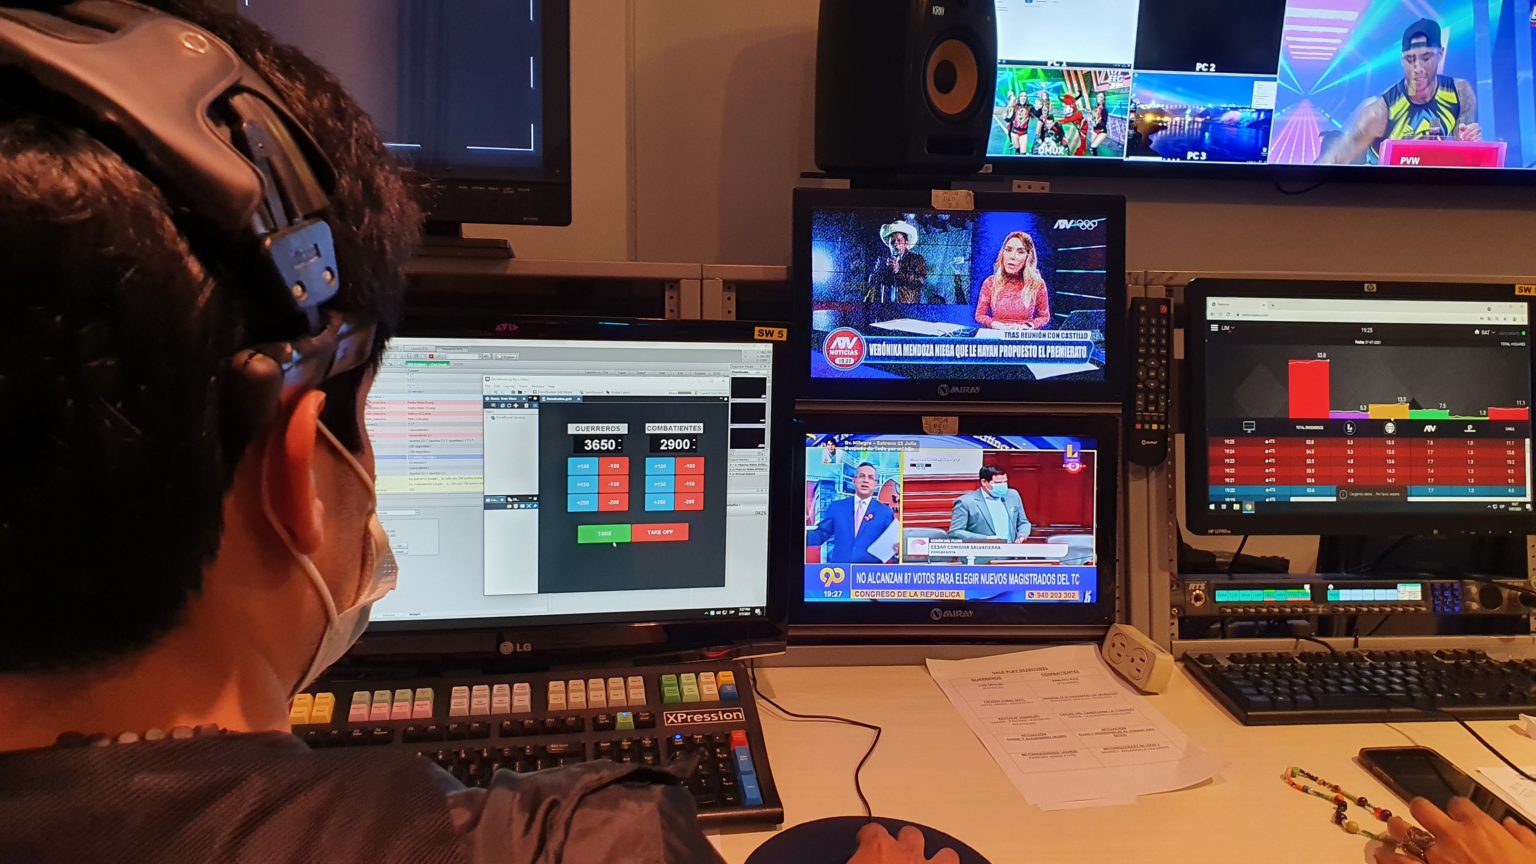 América Televisión has announced it has improved its production offering by choosing Ross Video's Inception Cloud platform.